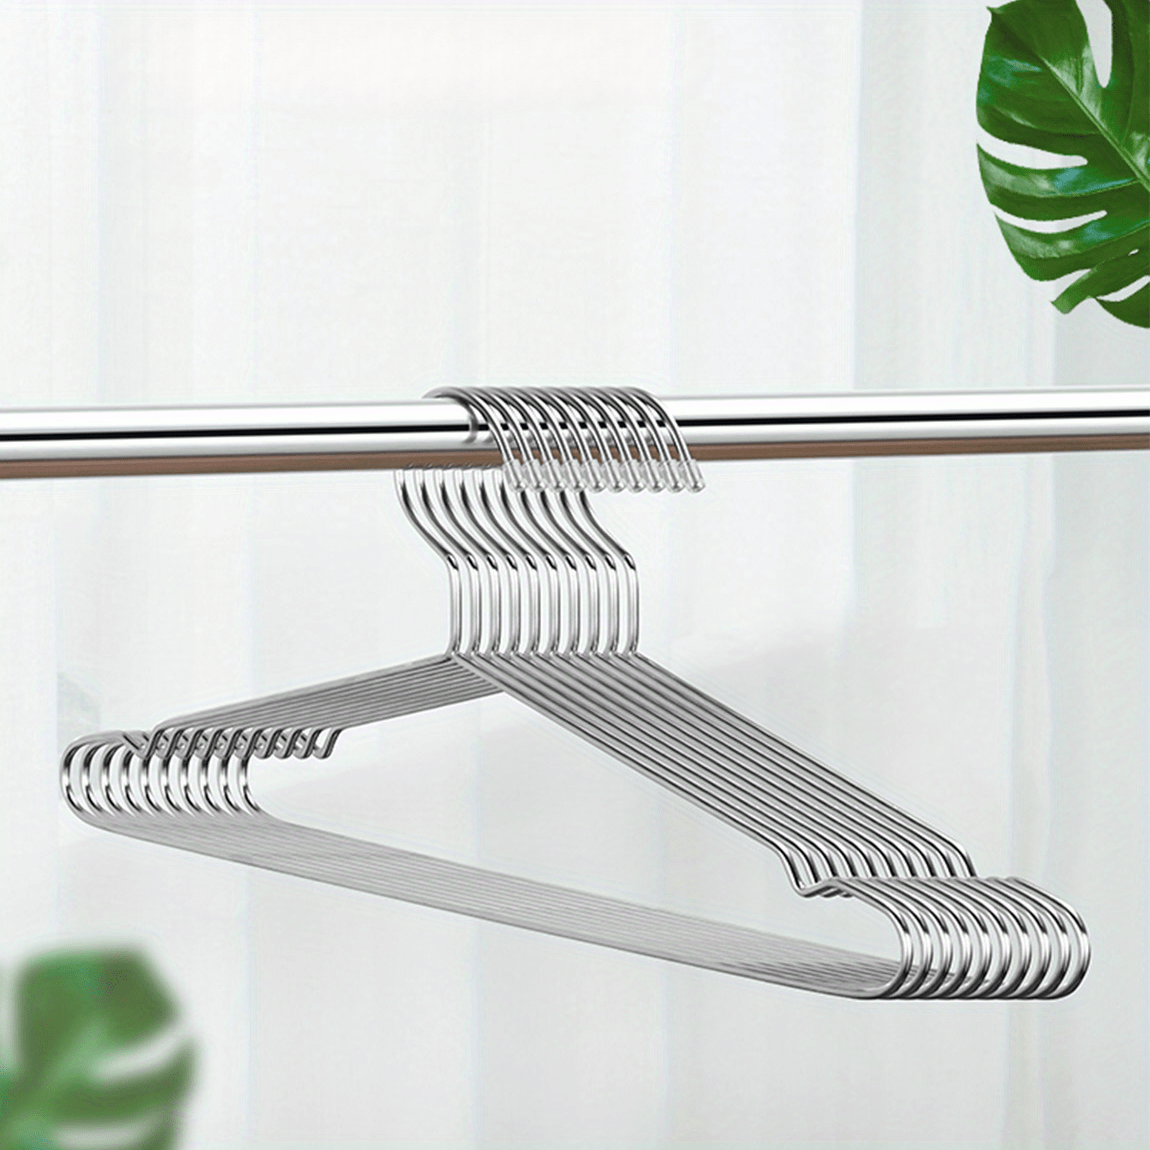 Stainless Steel Wall Mounted Hanger For Kitchen, Bathroom, And Cosmetics  Organize Clothes, Hats, Towels, Shoes, Coats, Closets, With Ease From  Tikopo, $15.03